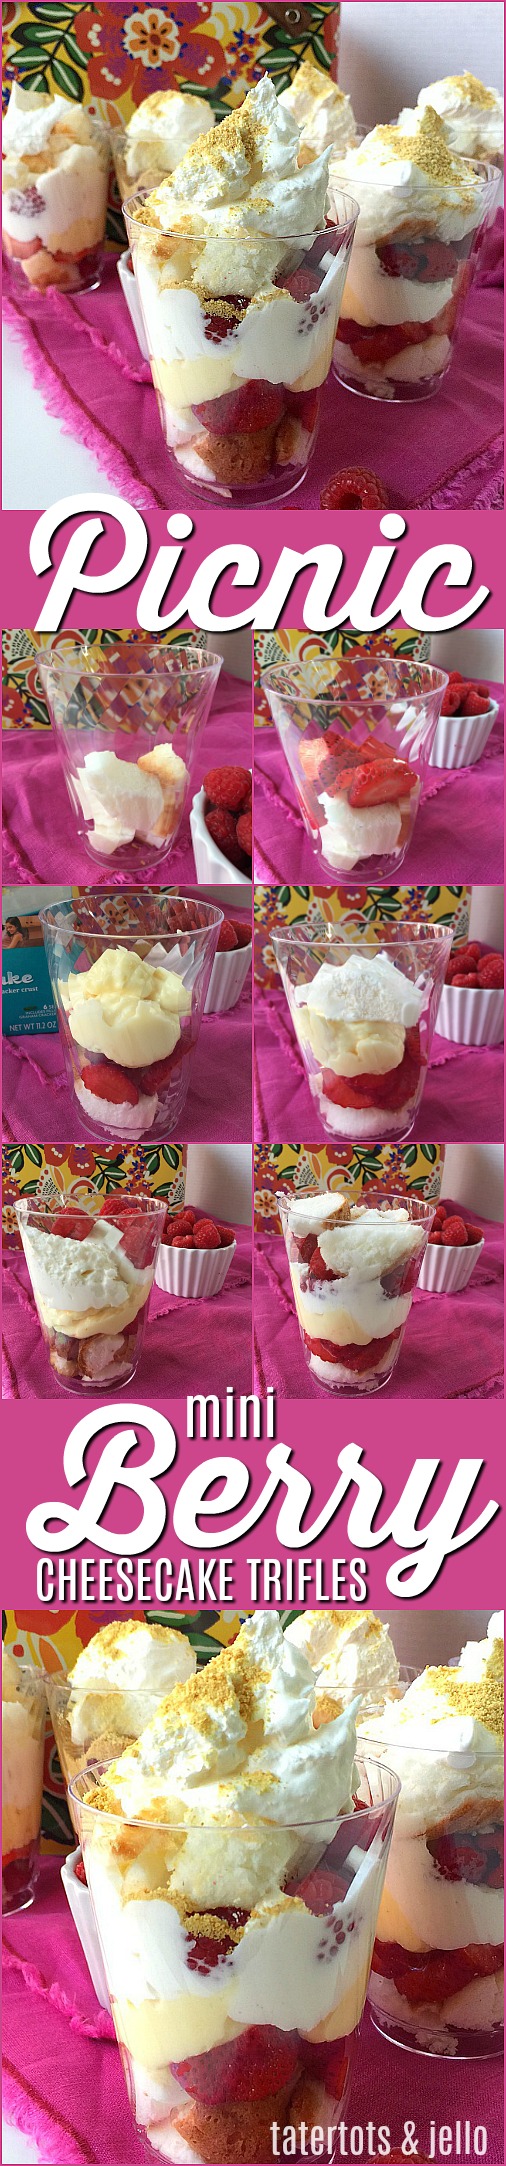 Mini Berry Cheesecake Trifles are the perfect dessert to take on a picnic. You can make them up ahead of time in clear plastic cups and then use a lid or press and seal saran wrap to keep fresh in your picnic basket. 